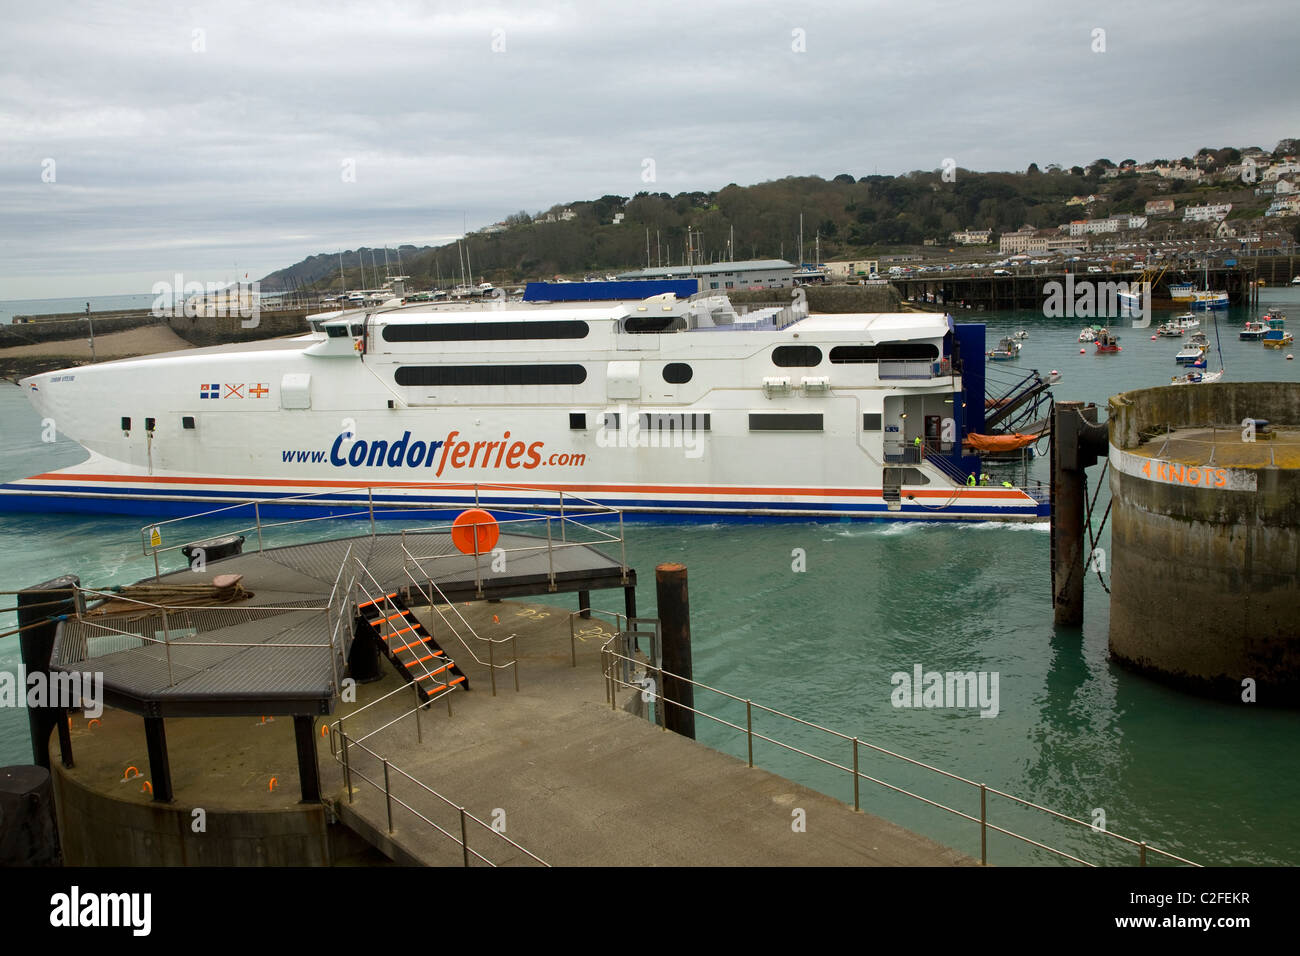 Condor Ferries boat leaving St Peter Port Guernsey, Channel islands Stock Photo